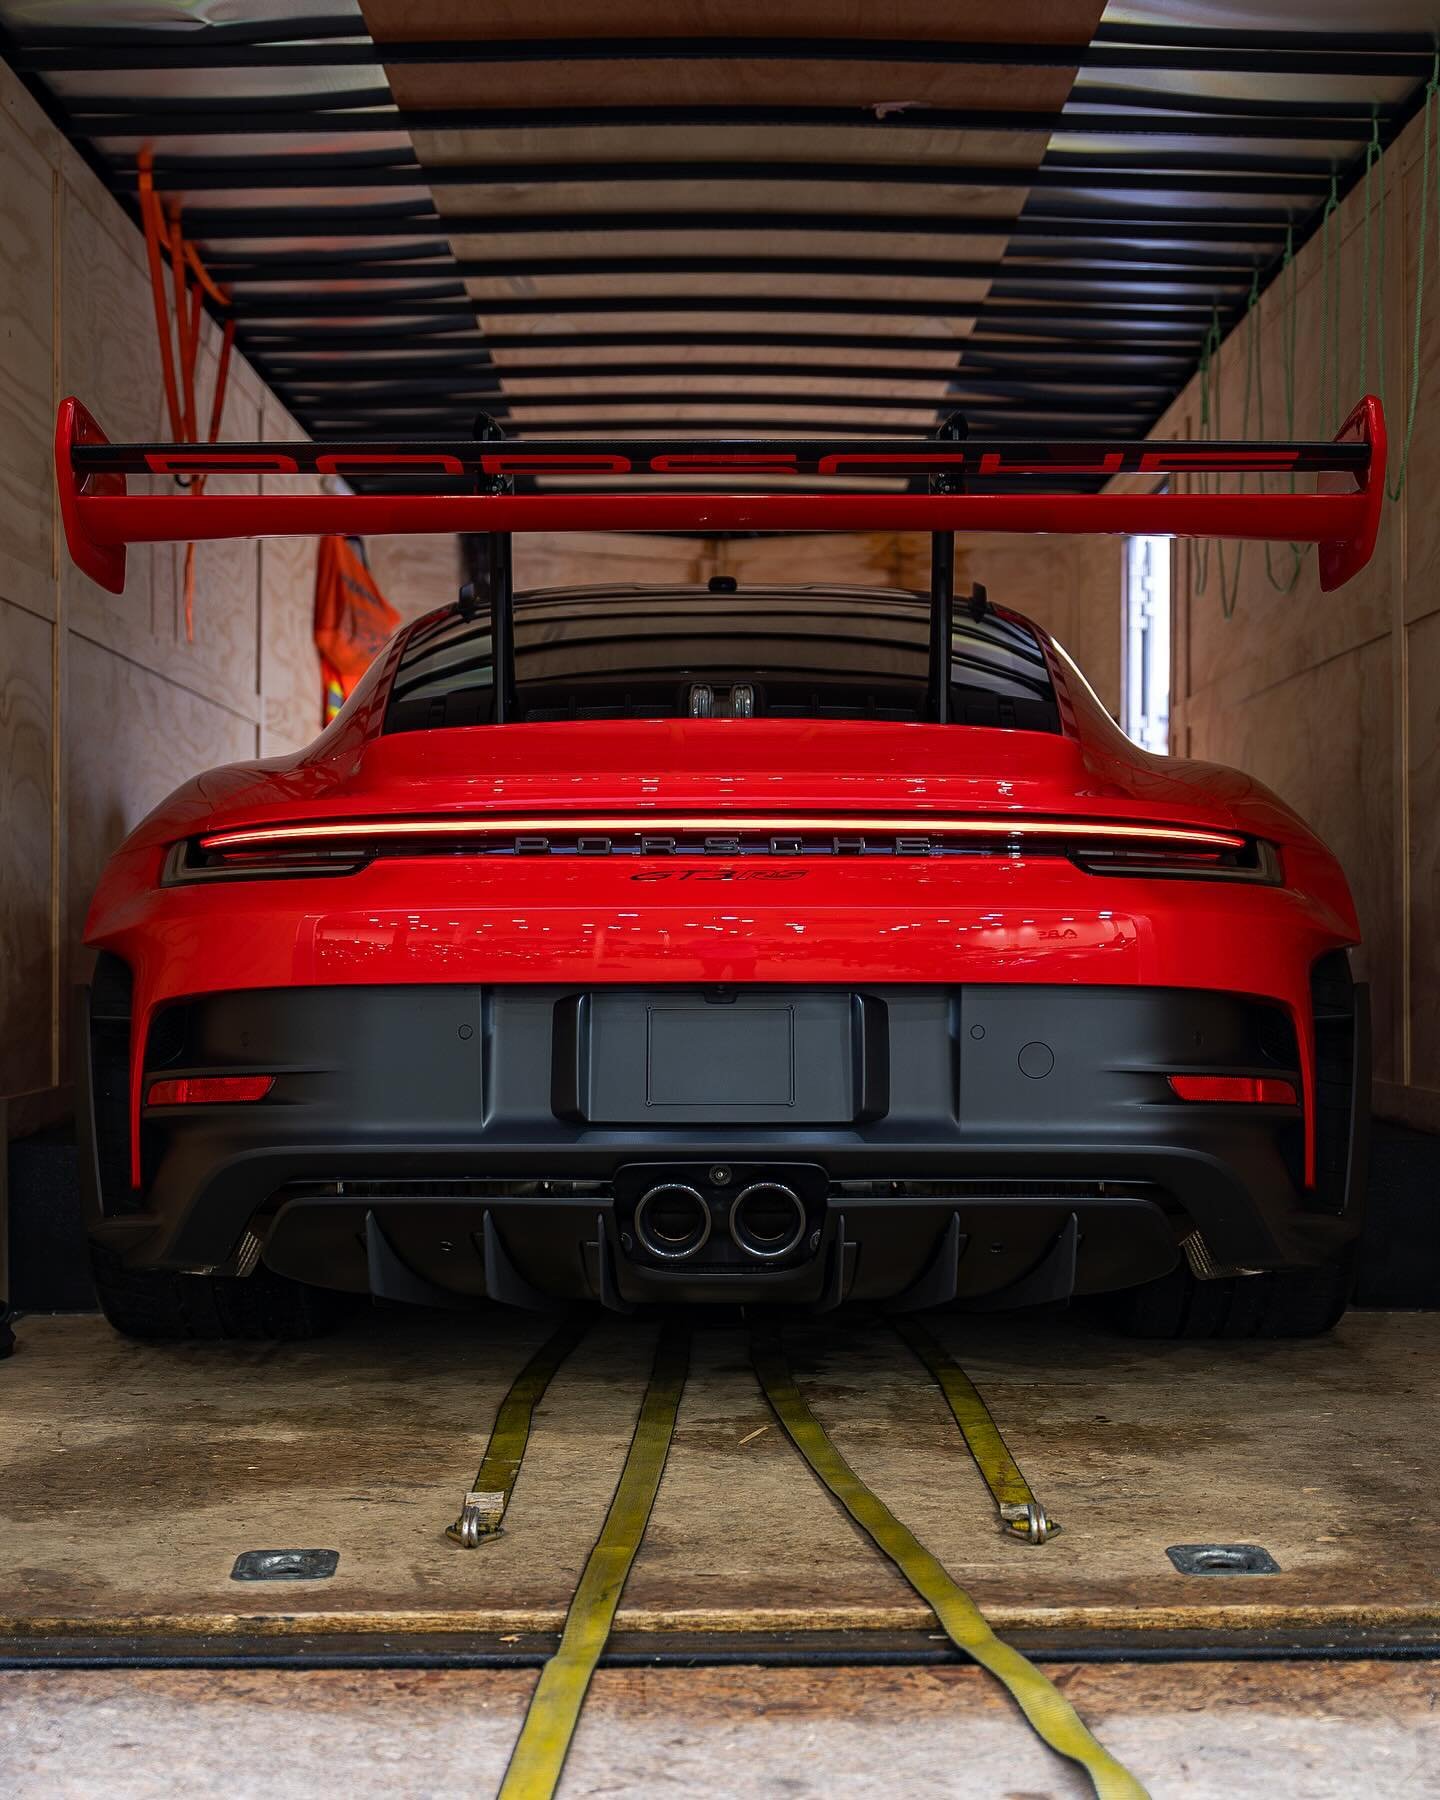 Delivery Day for another Guards Red 992 Porsche GT3RS 💂🔥 Leaving our shop protected with Full Front End PPF before even hitting the road 🤌
.
Tags: #porschegt3rs #porscheclassic #porscheclub #gt3rs #porschegt3 #porschelife #carsofinstagram #guardsr